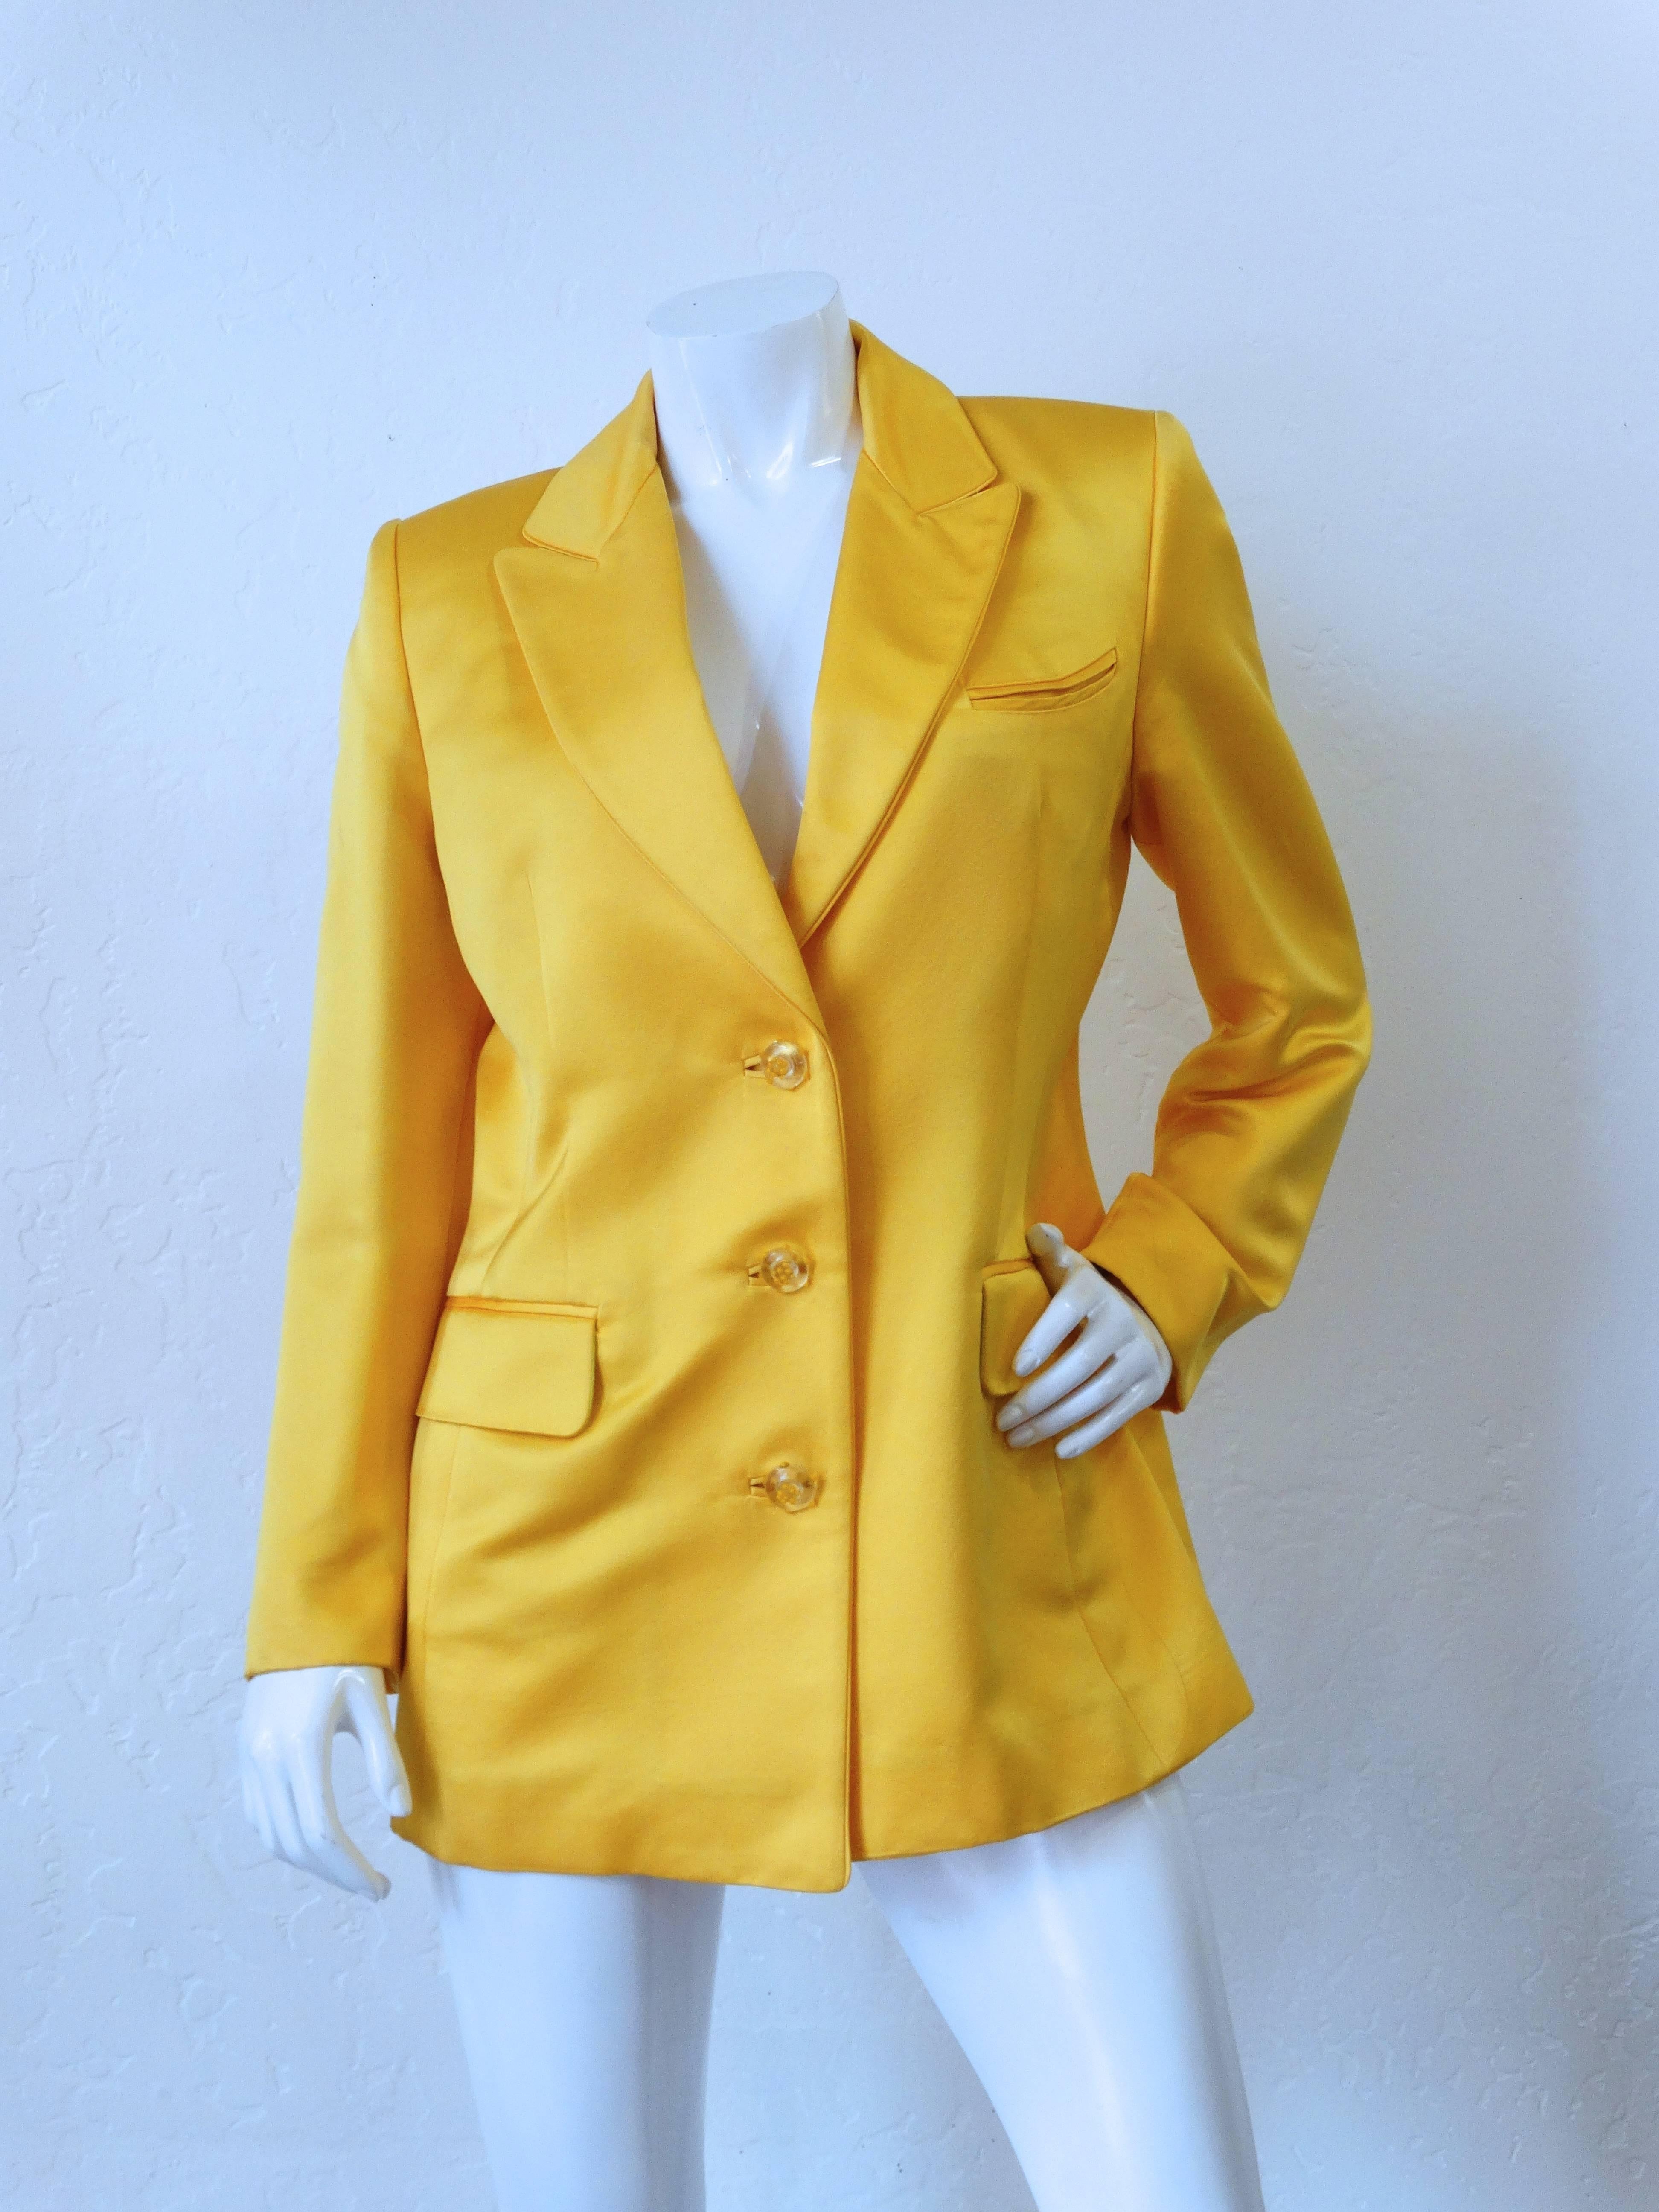 1980s Pam McMahon Blazer in a Primerose Yellow Satin. Classic tailored fit. Unique glass button closure up the front. Pockets at either side of the waist. Green piping on the interior. Marked sz 44 

Measurements 
Bust: 17